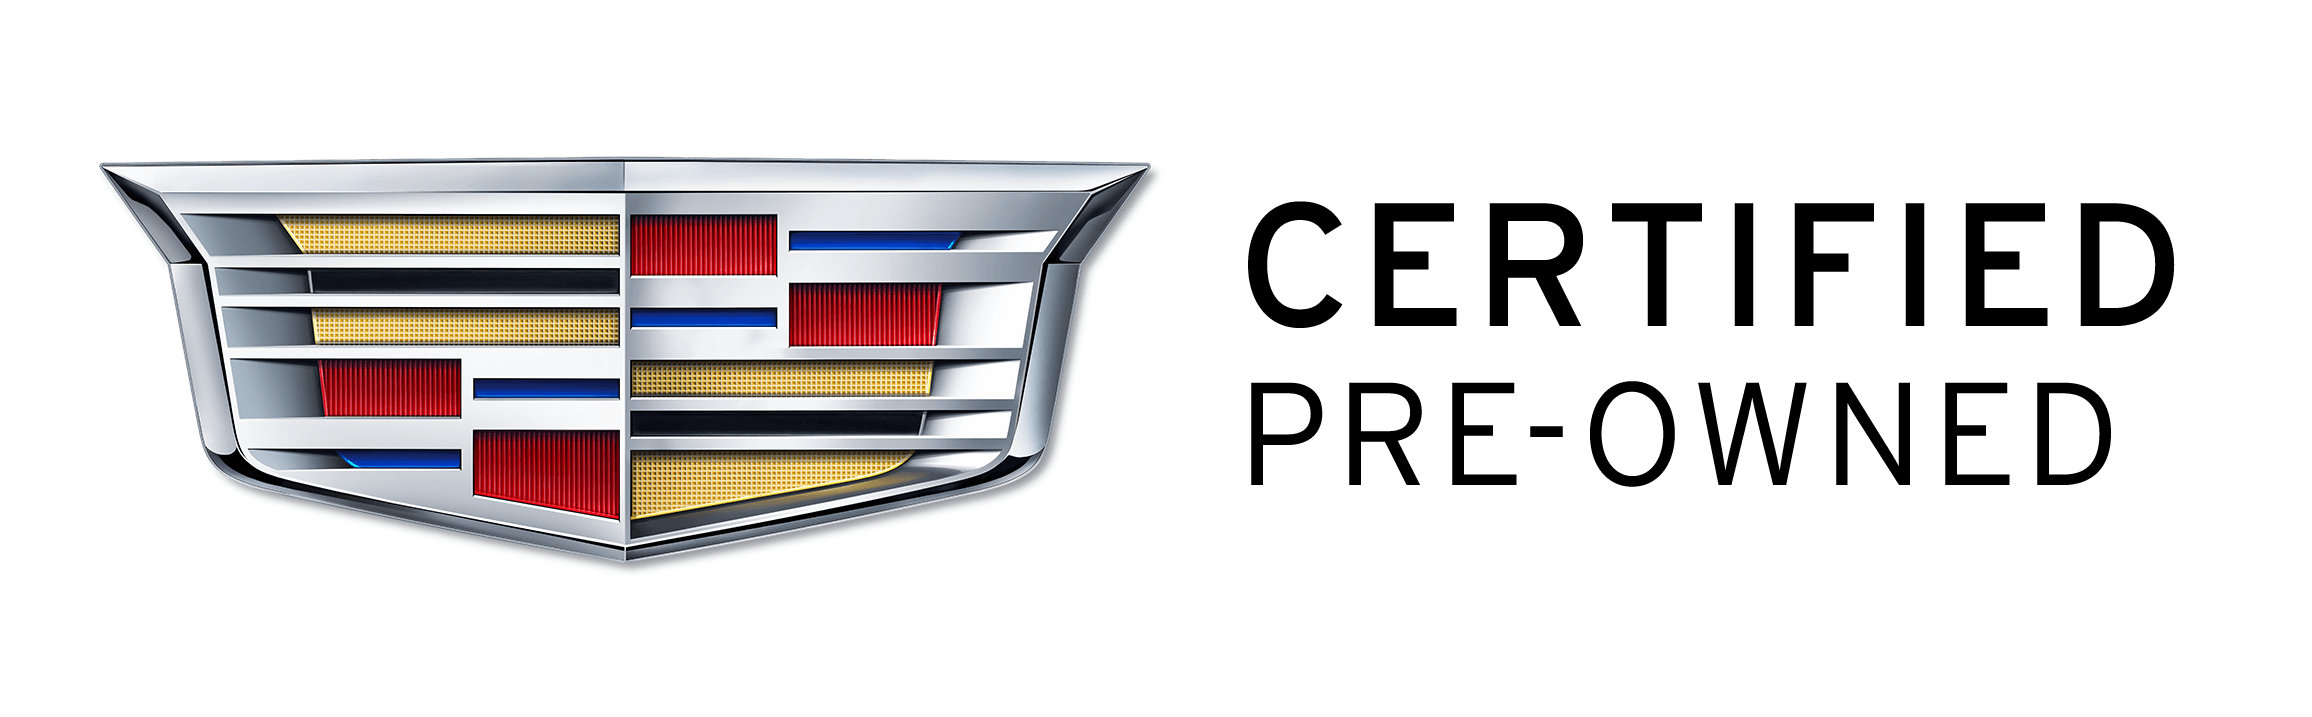 Certified Cadillac Logo - Certified Pre Owned Cadillacs In Pawleys Island, SC